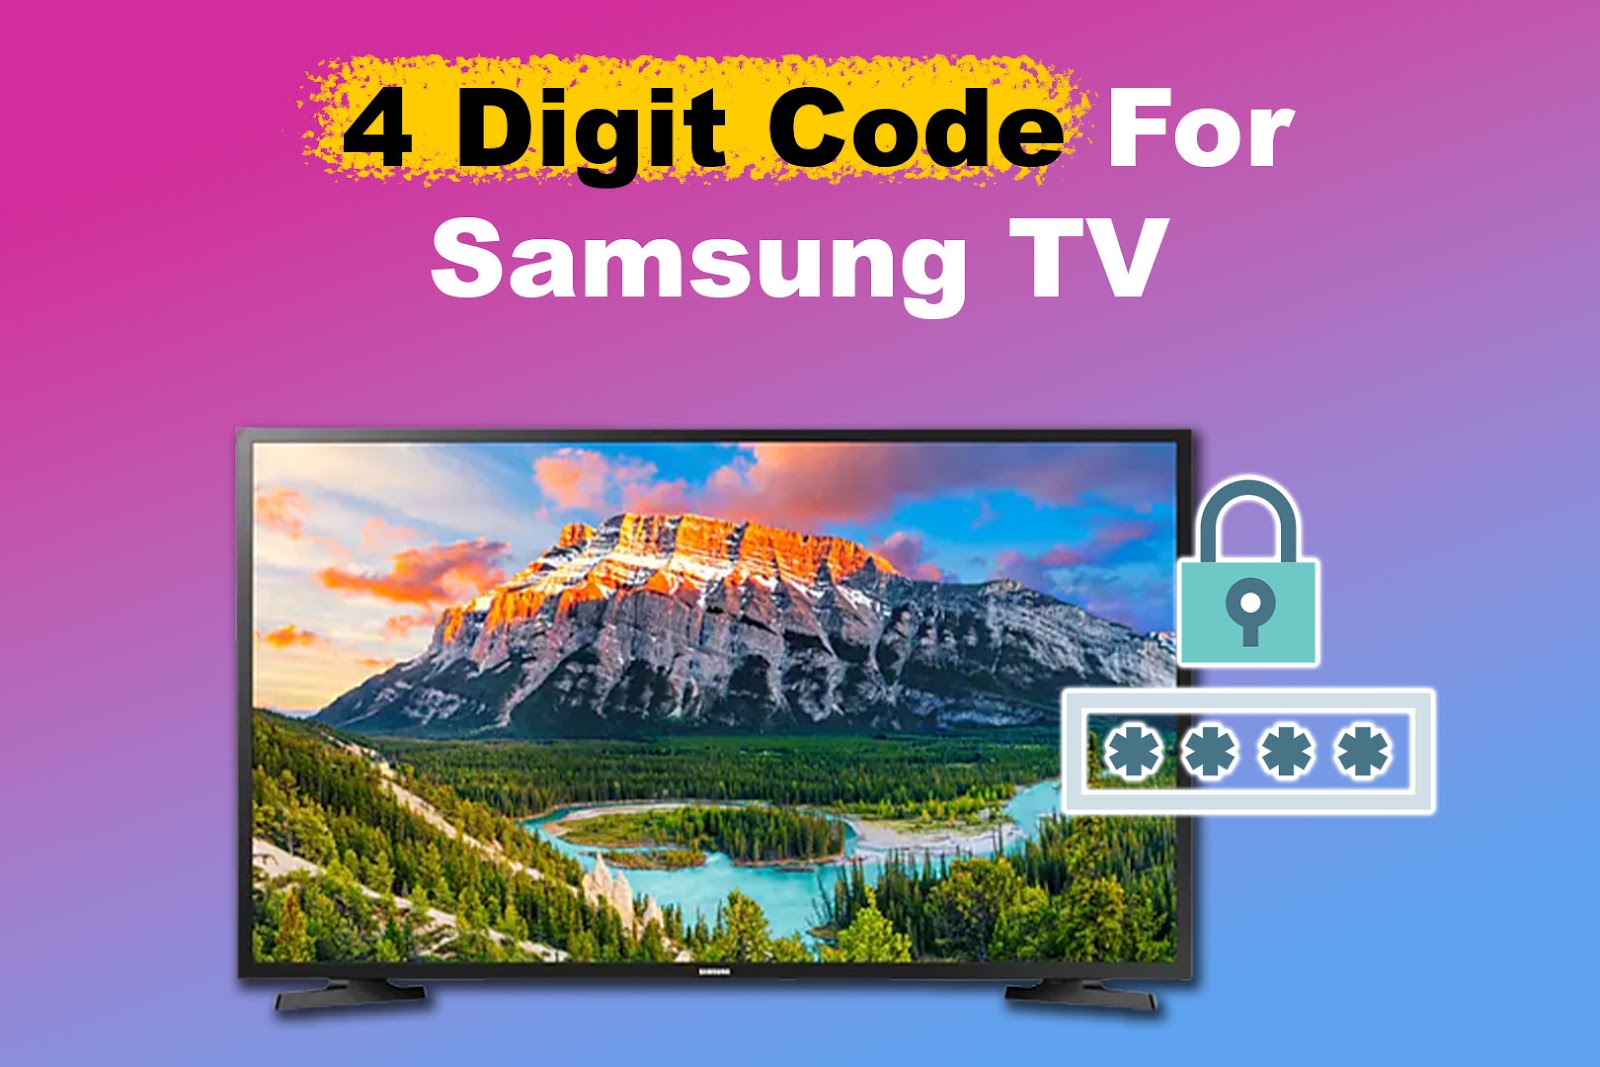 4 Digit Code for Samsung TV [How to Find It]